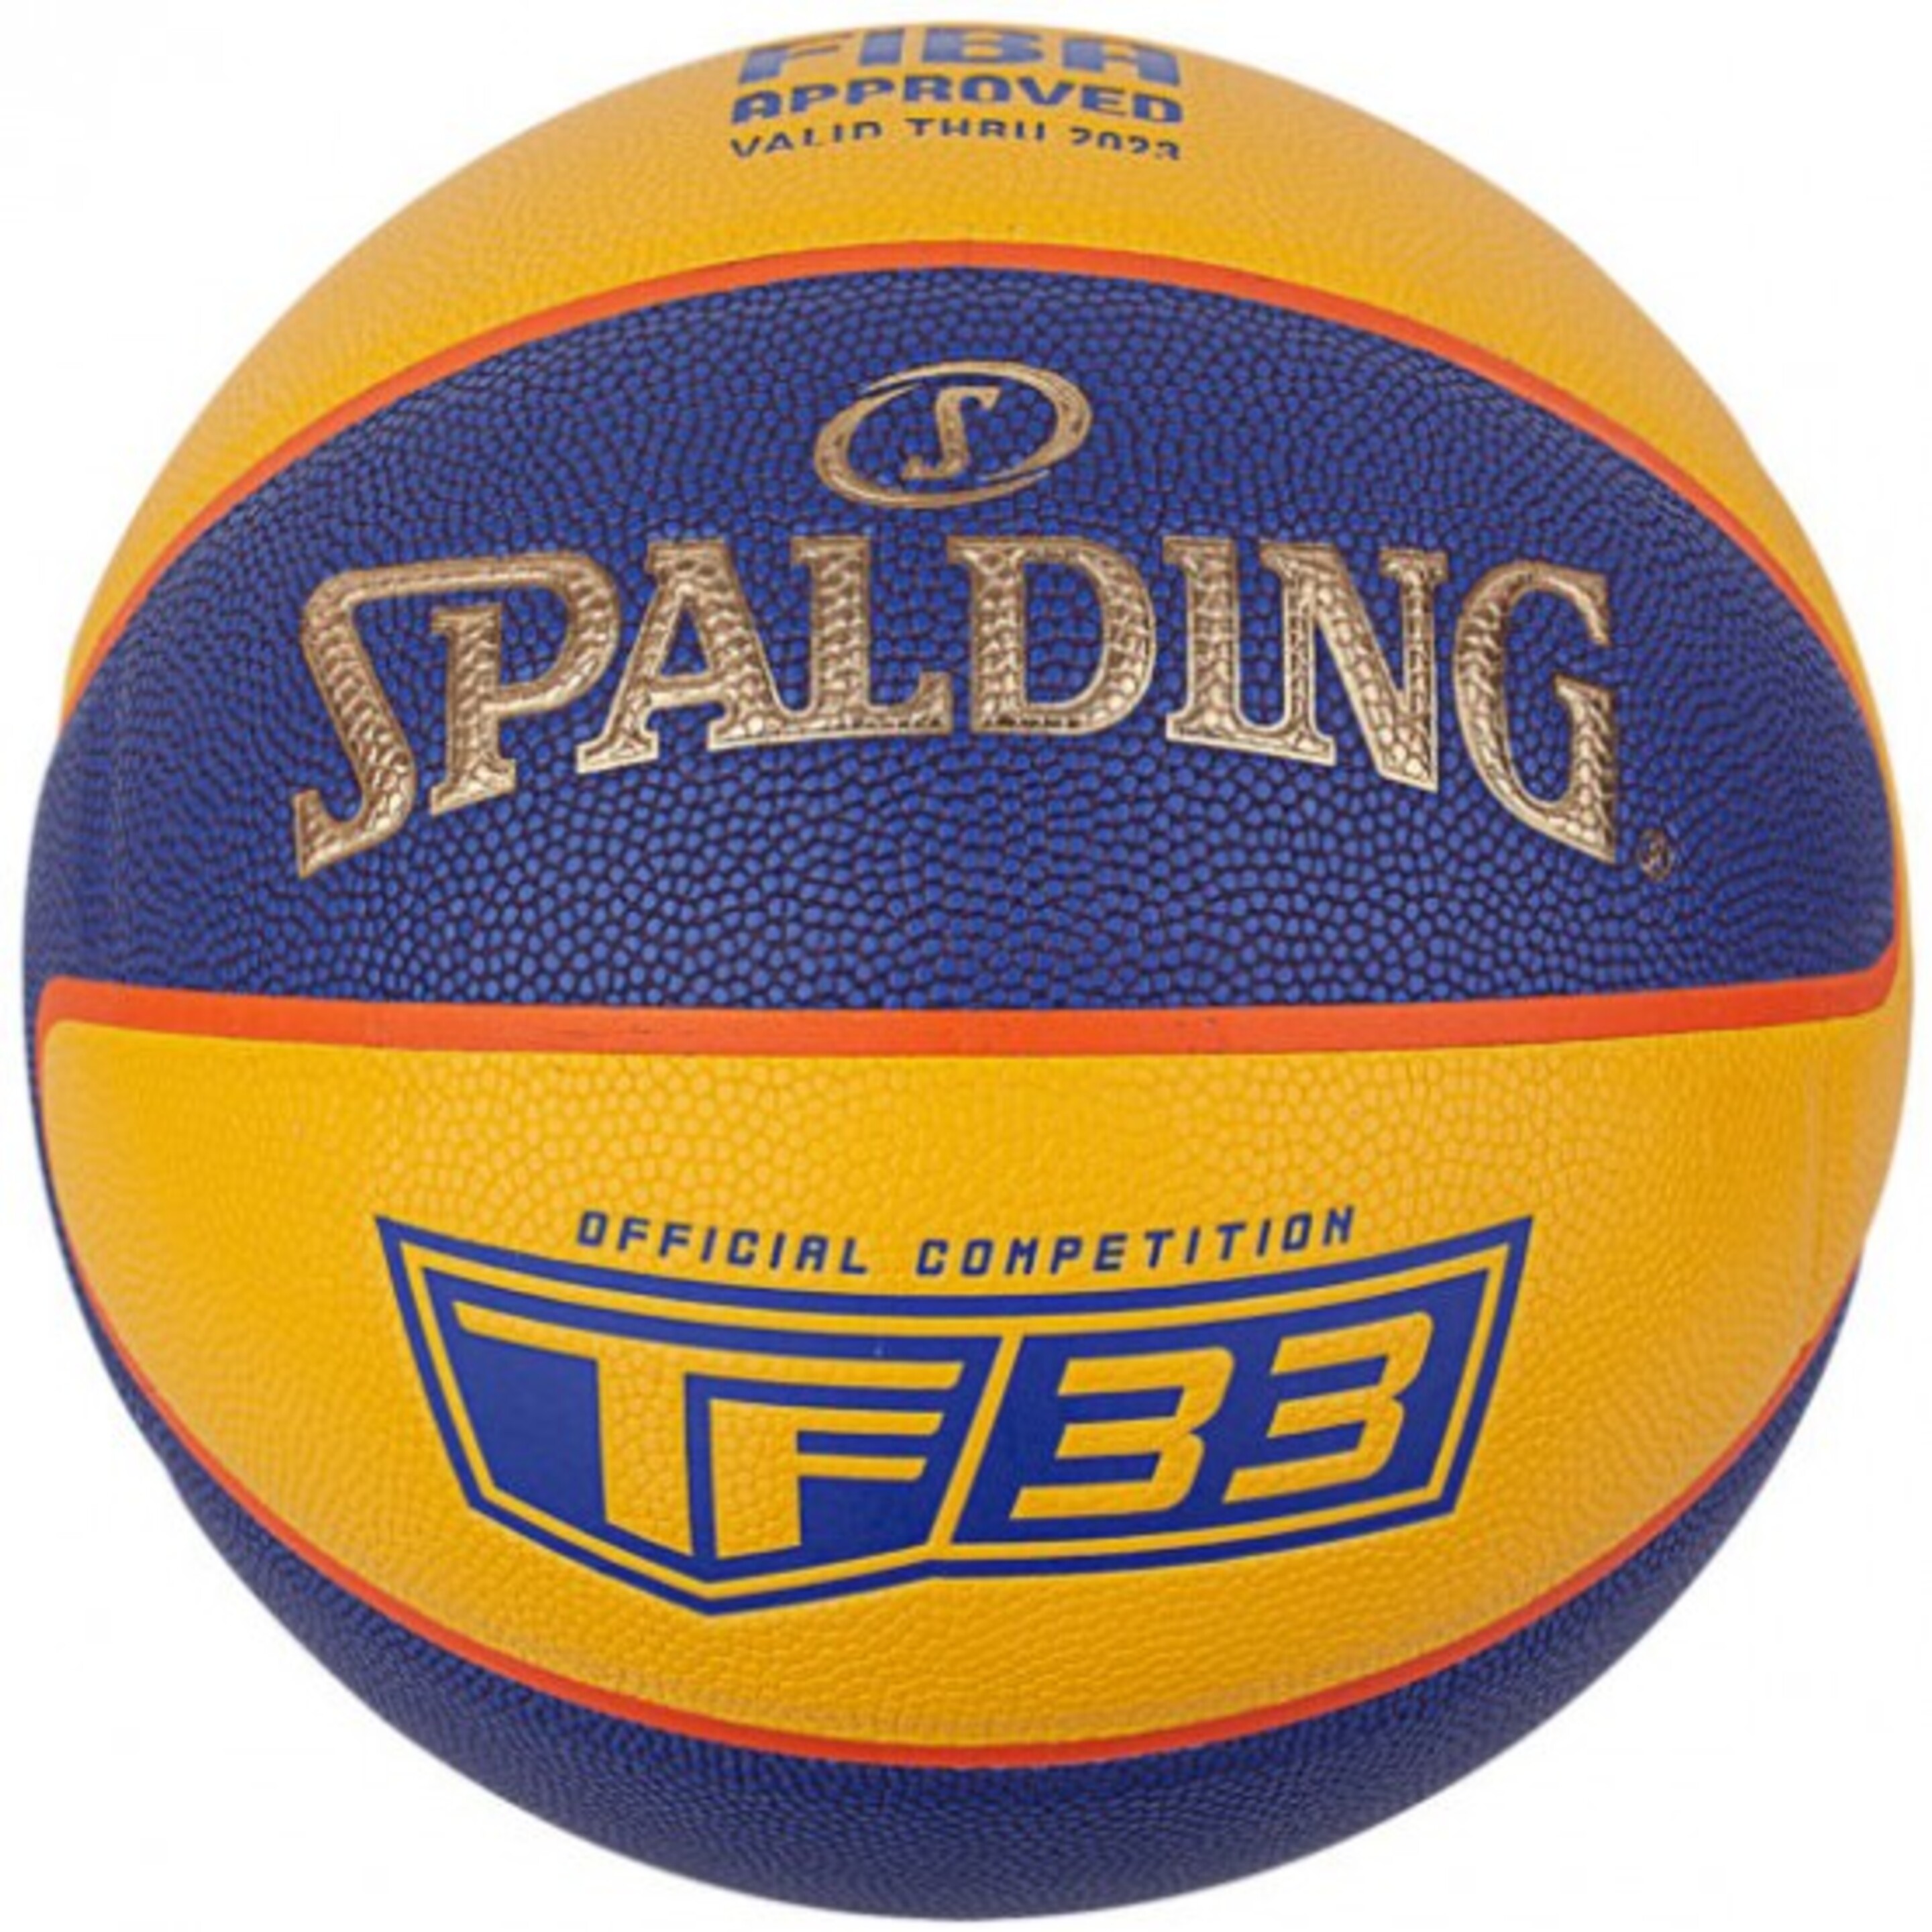 Bola Spalding Tf-33 Gold - In/out Sz6caucho - amarillo - 